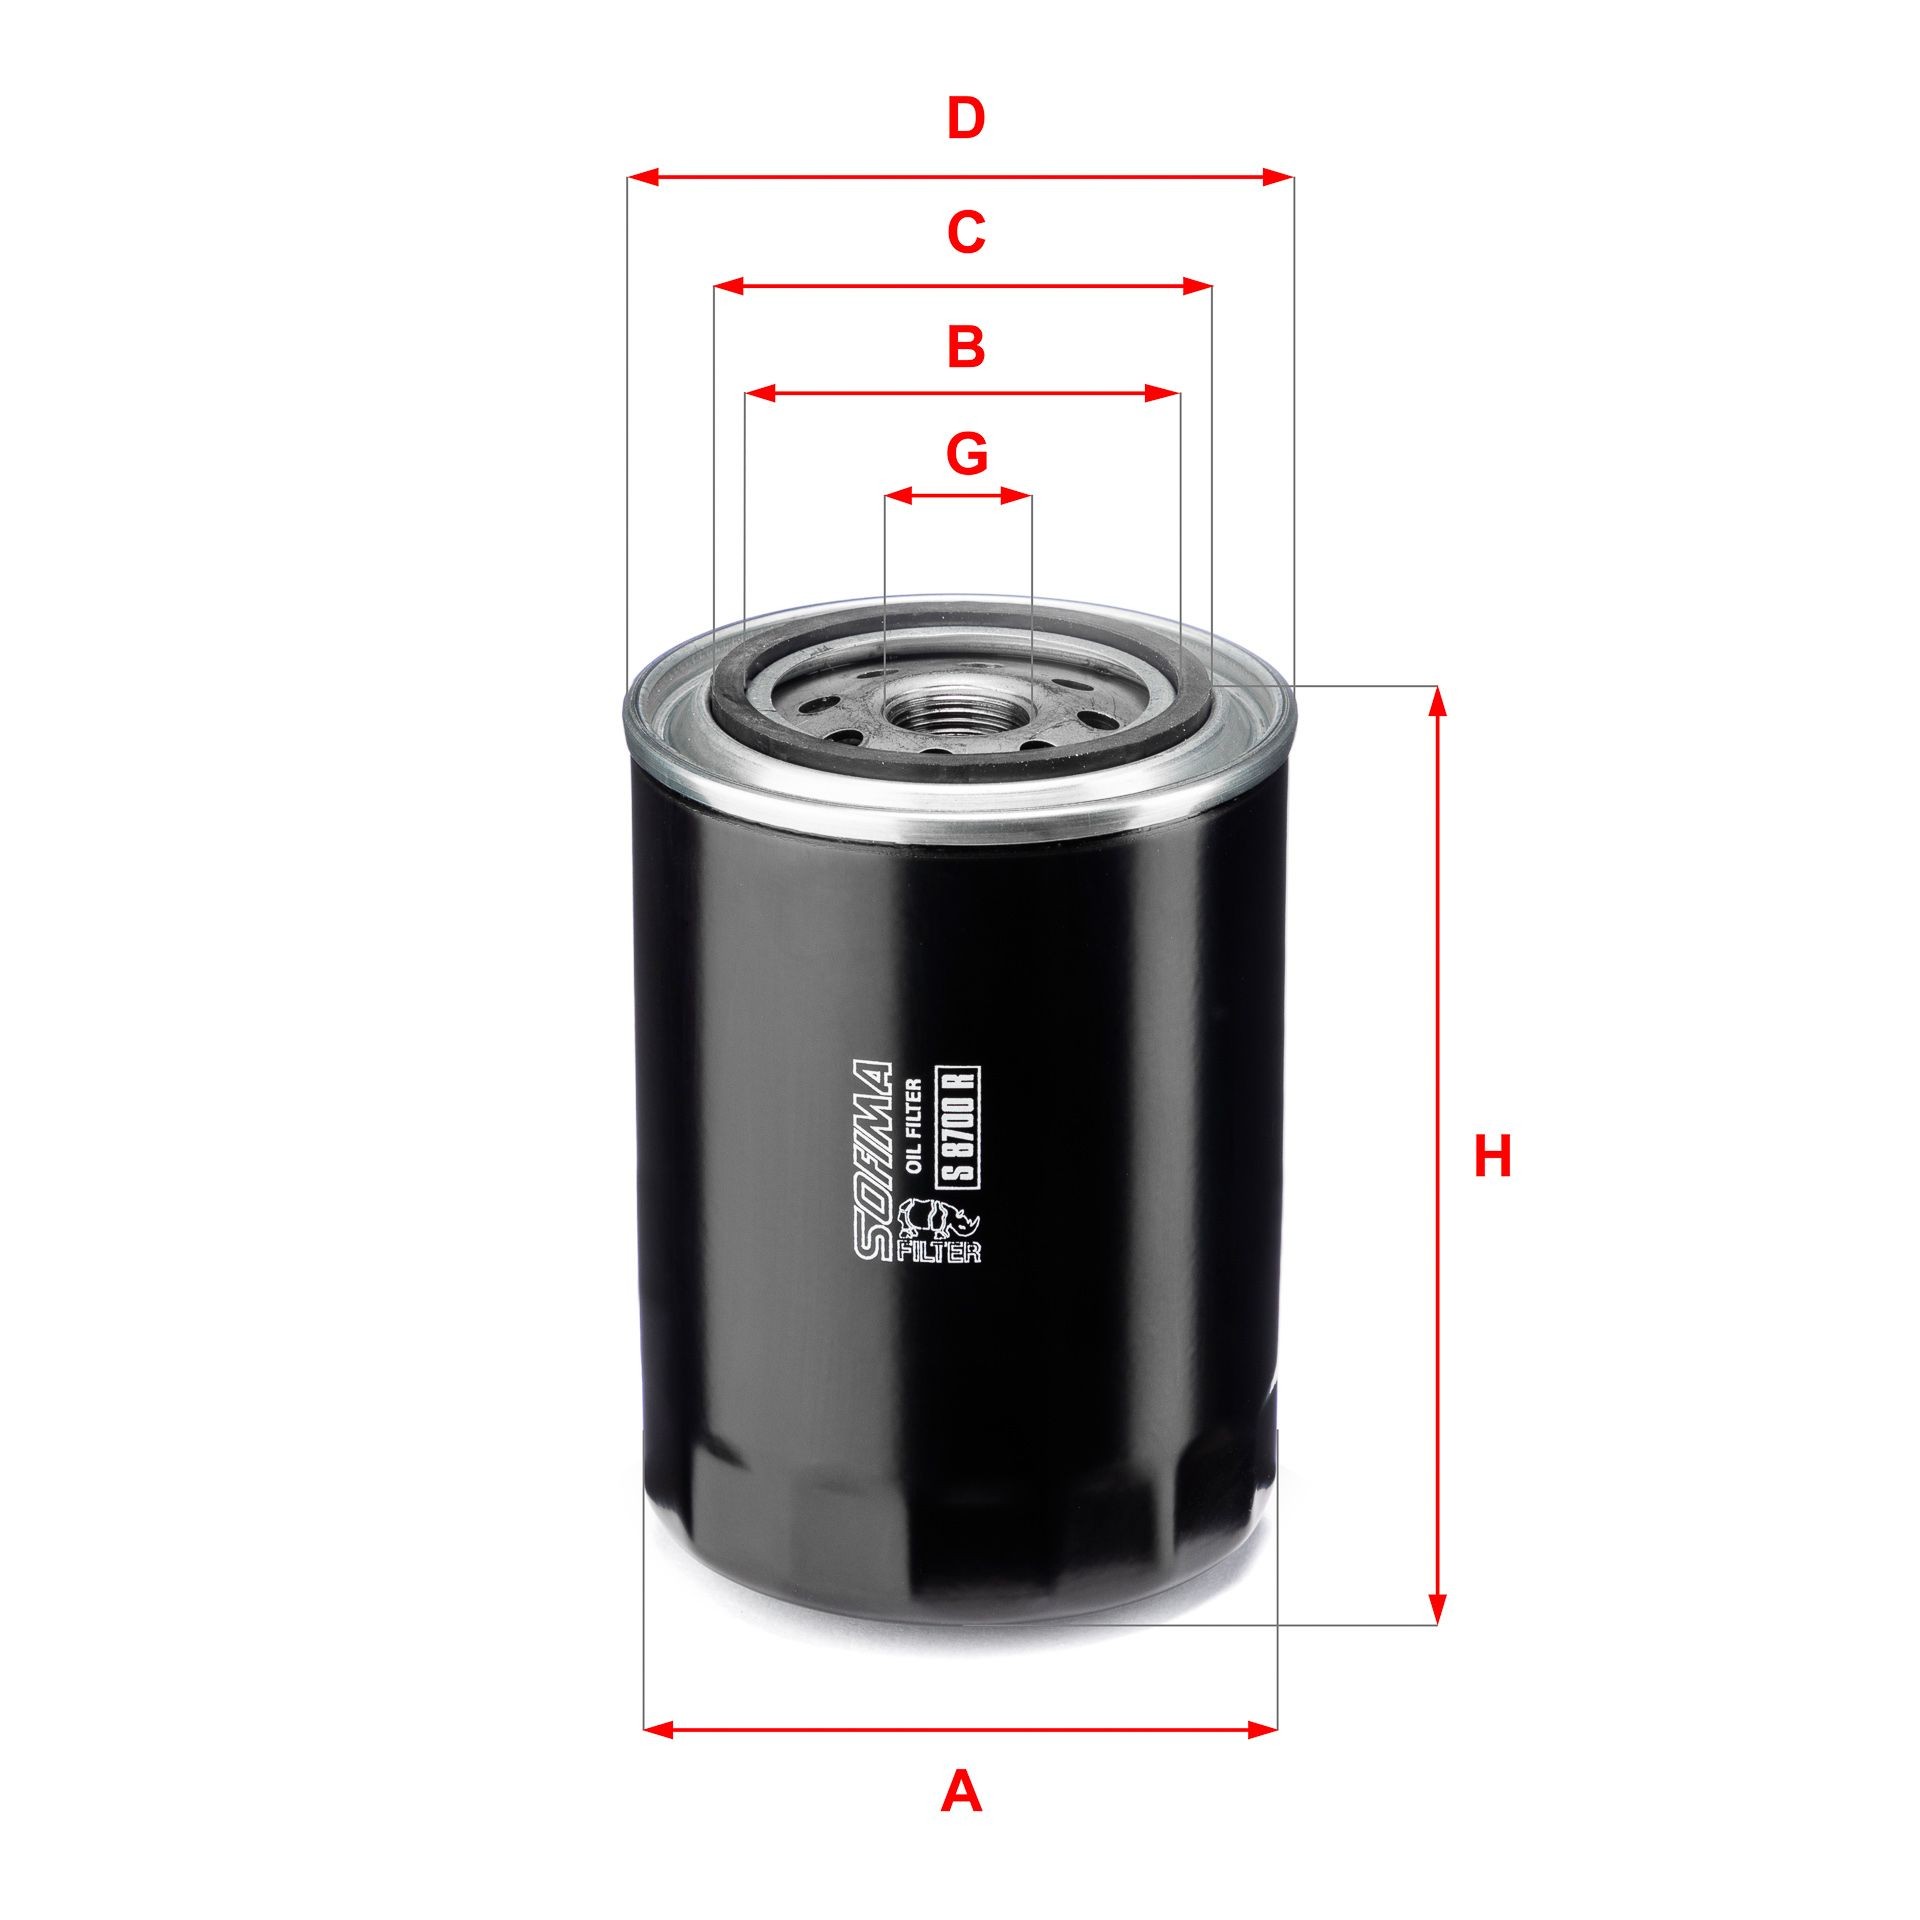 SOFIMA S 8700 R Oil filter 13/16-16 UNF, with one anti-return valve, Spin-on Filter